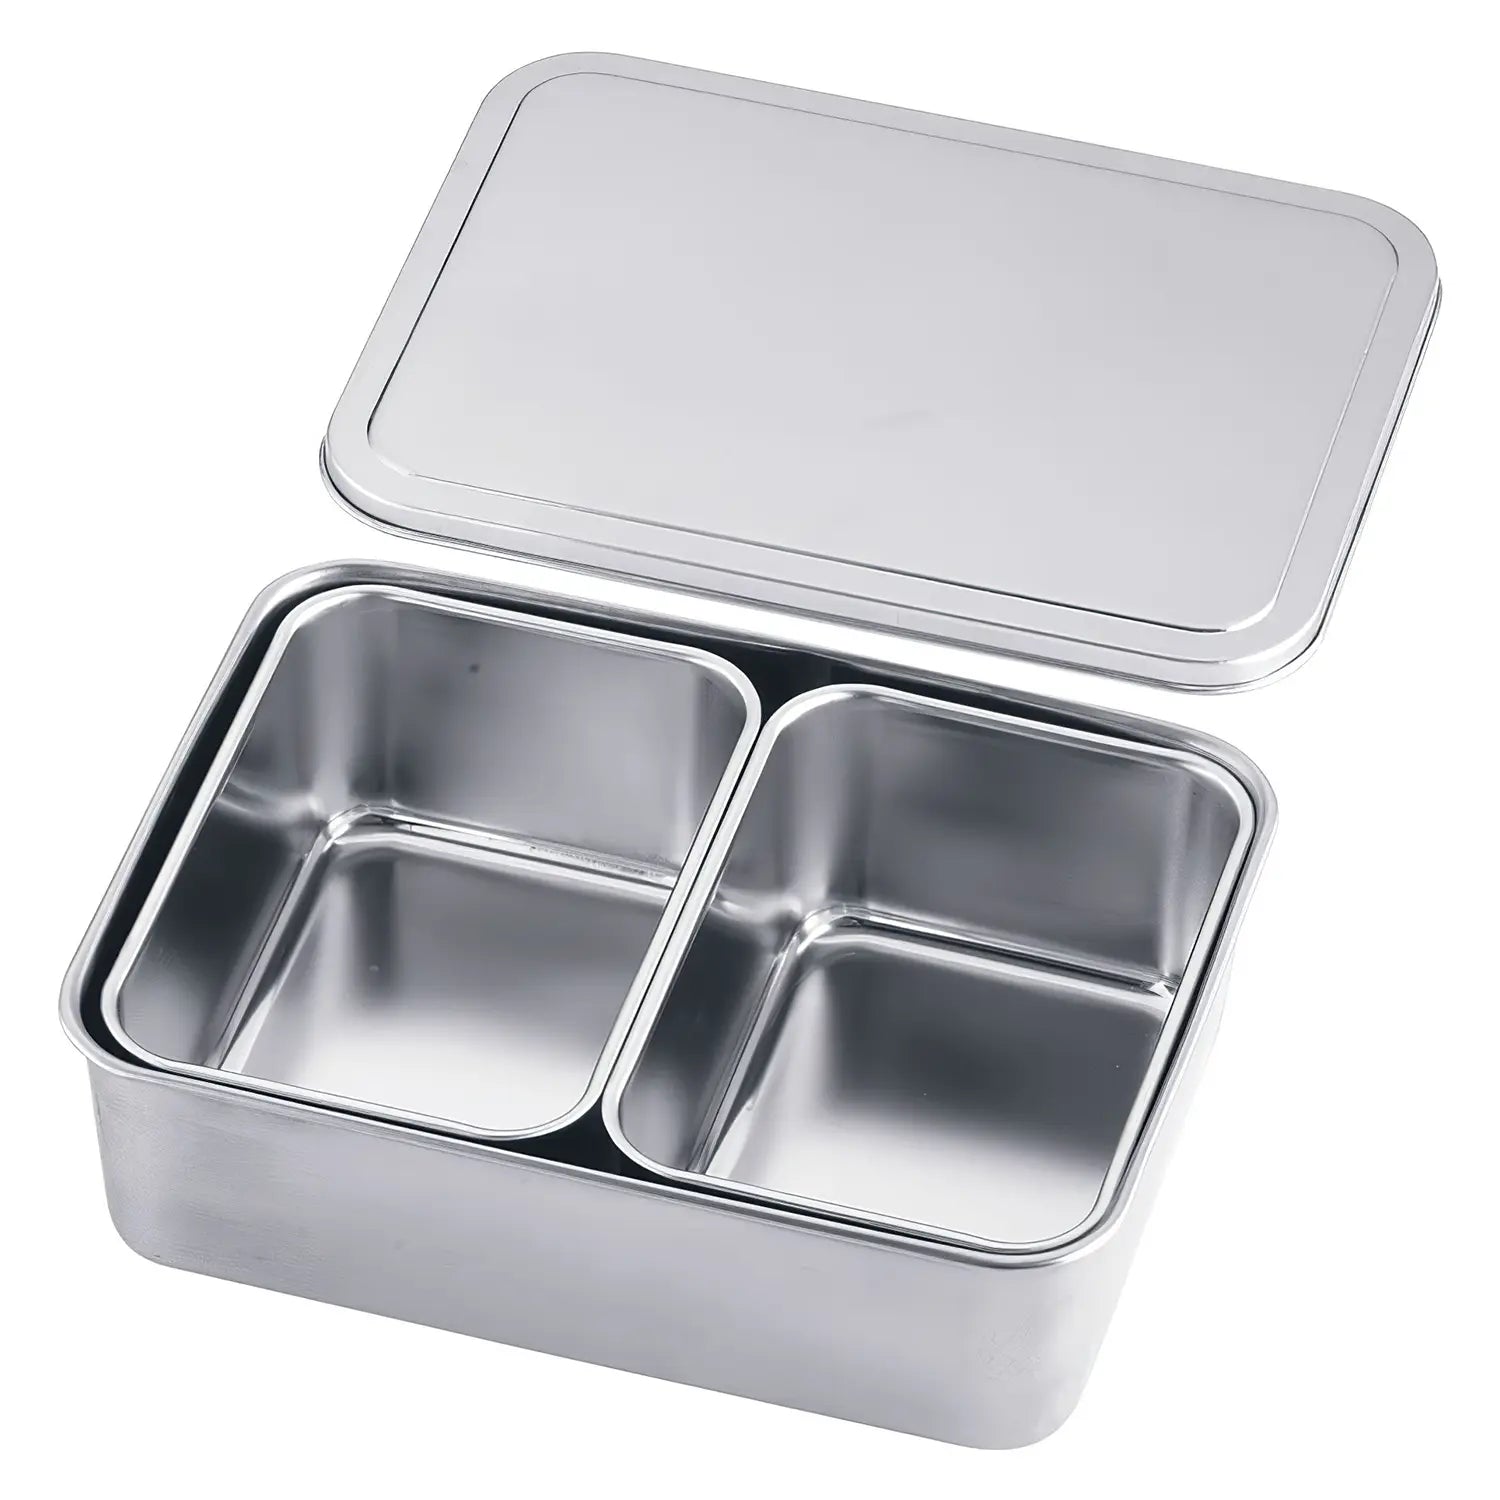 Stainless Yakumi Pan 4 Compartments Archives - Taste Masters LLC